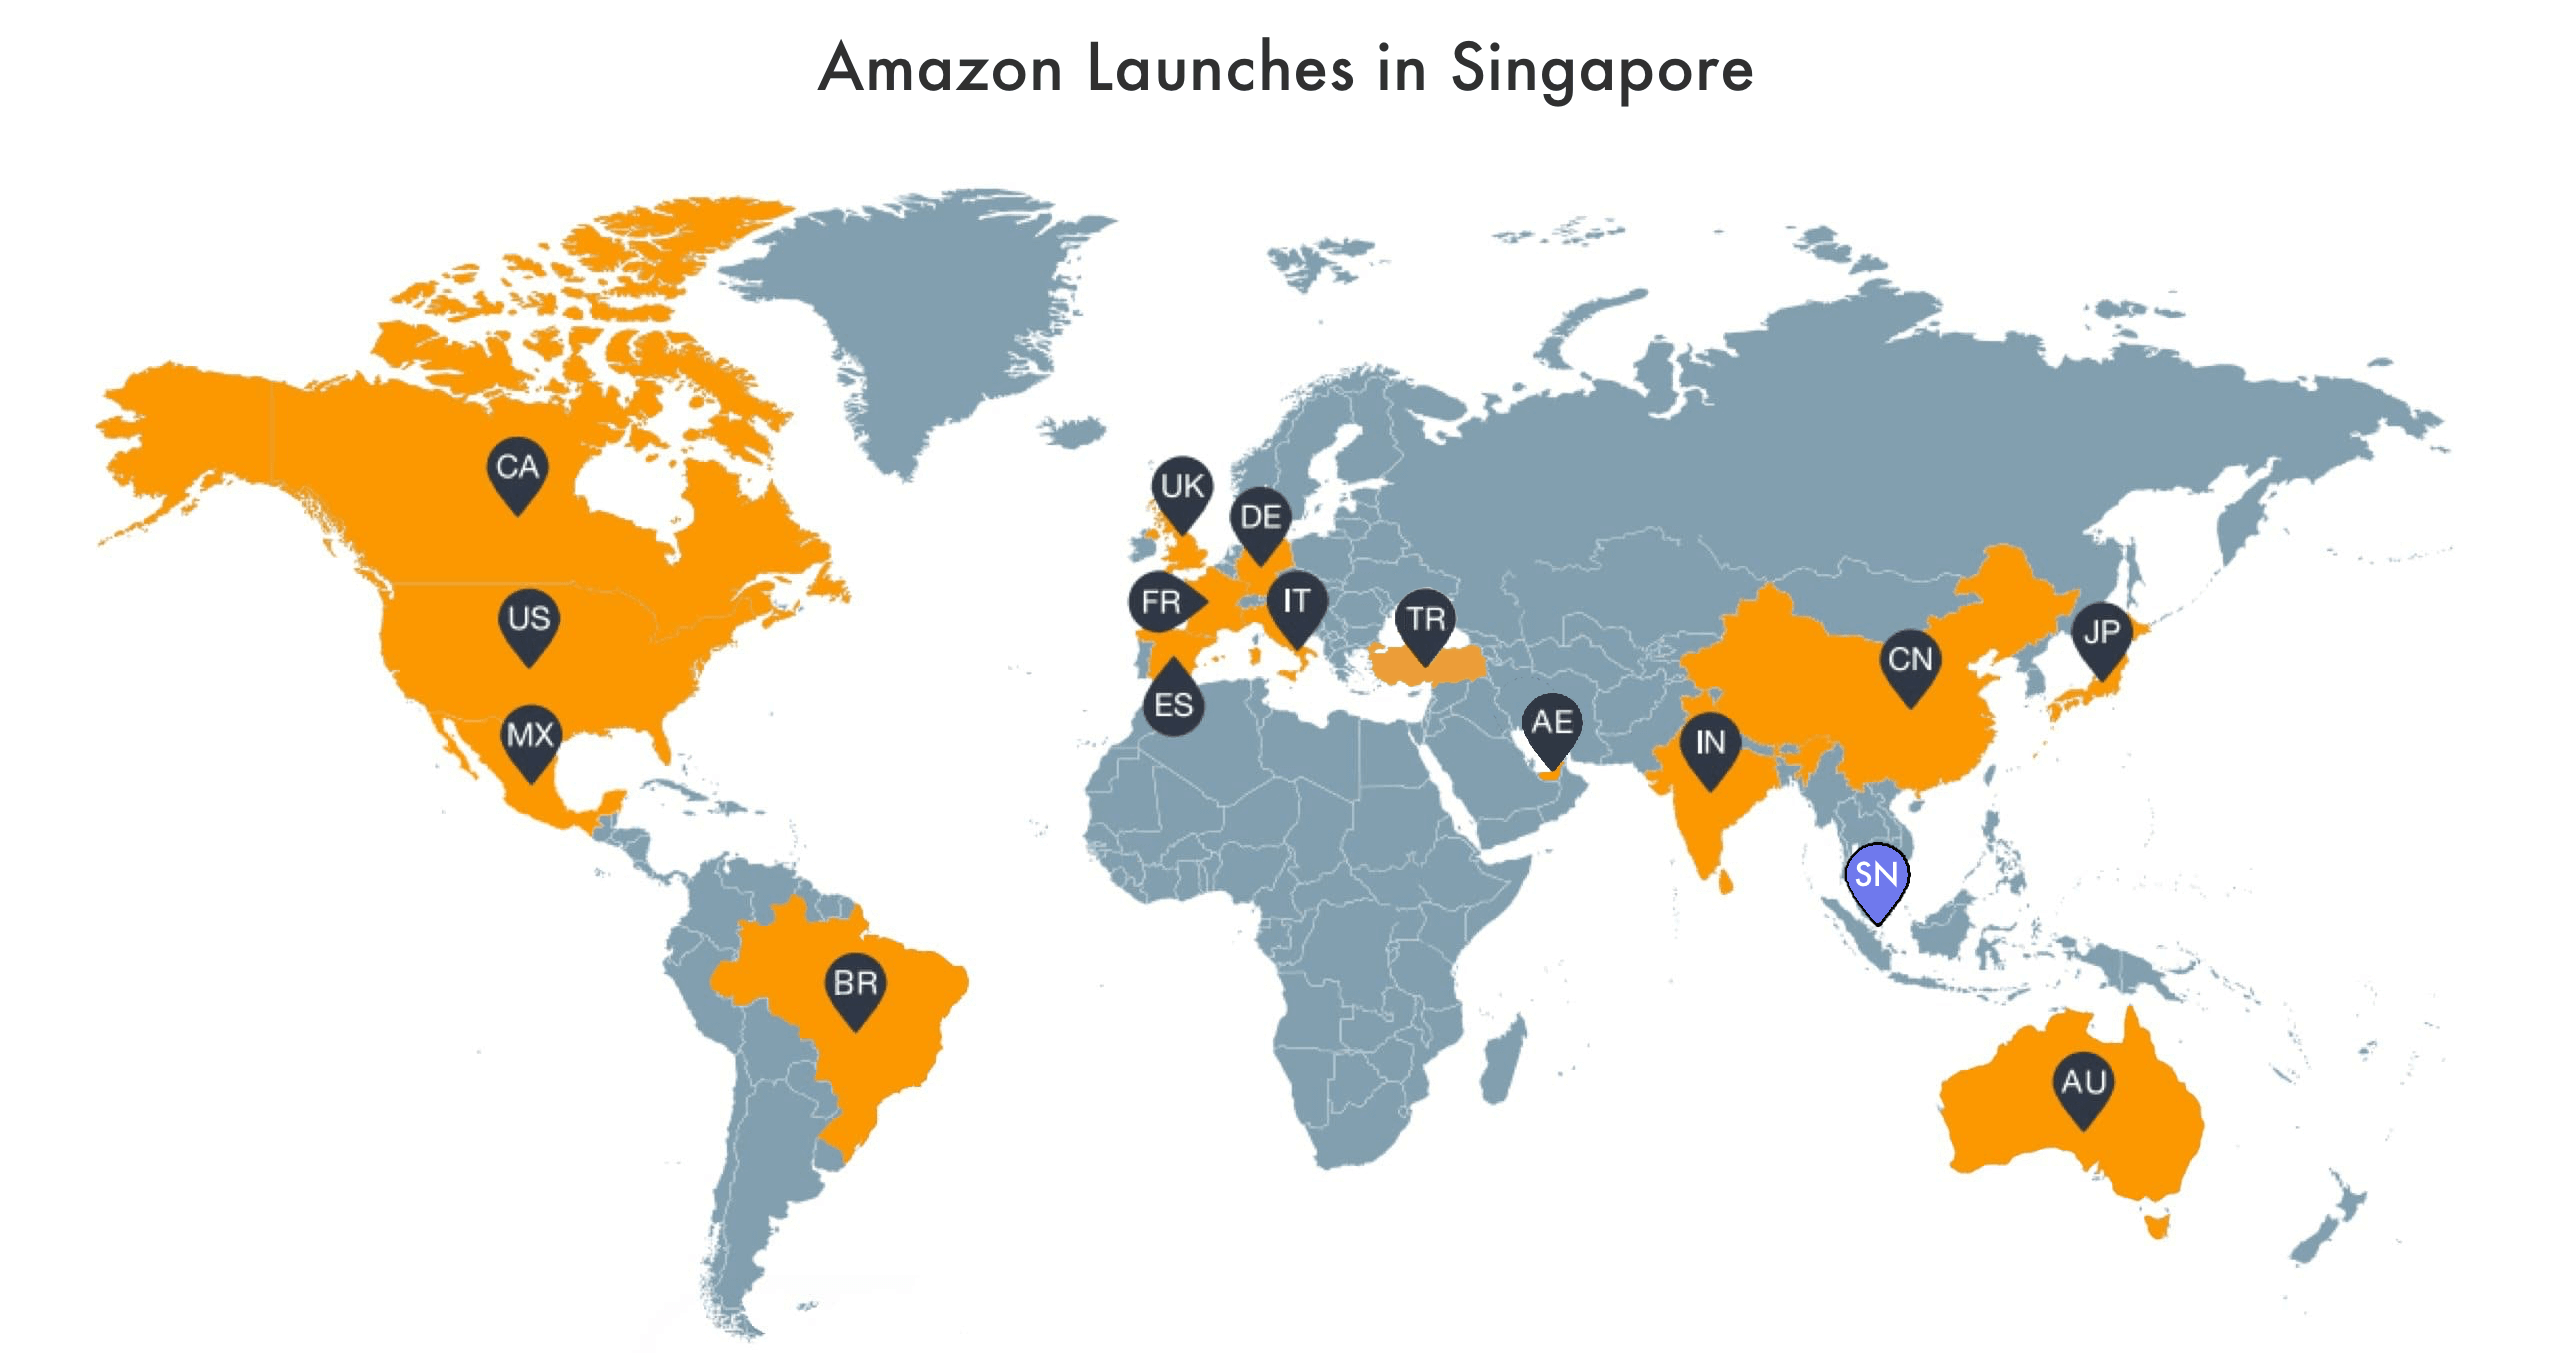 Amazon launches in Singapore